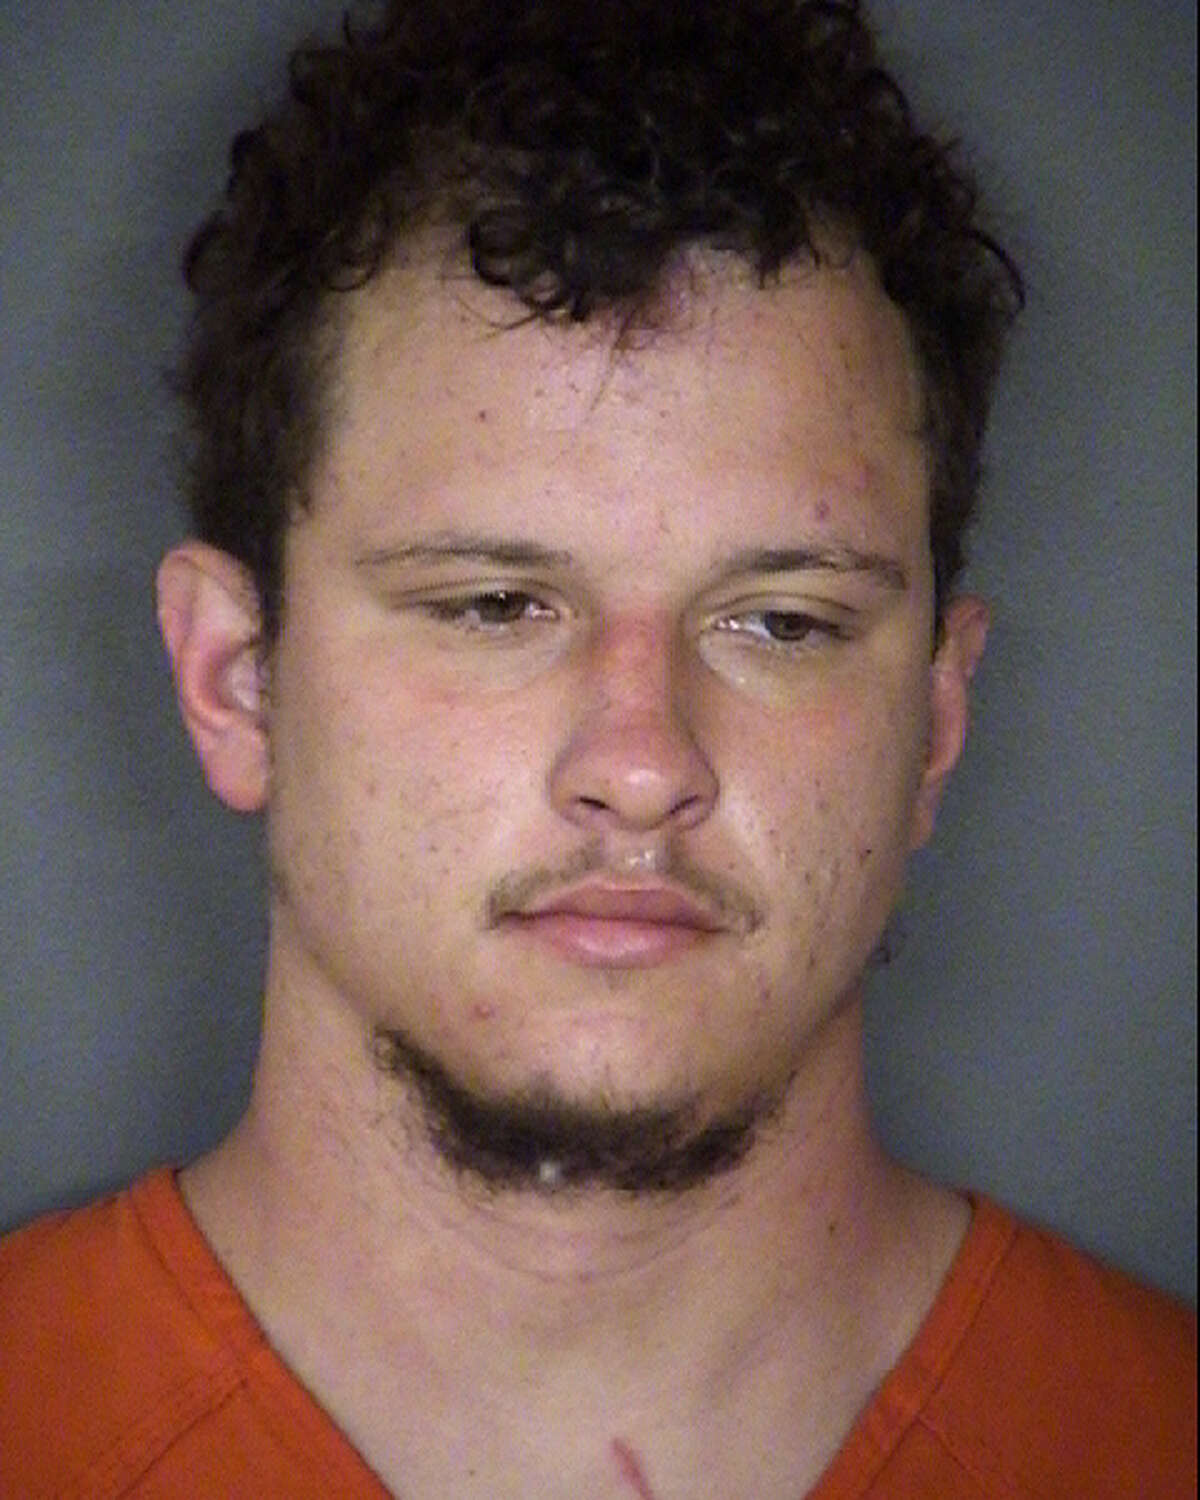 Lee Power, 22, was arrested on a charge of arson when he allegedly confessed to police that he had set the fire and wanted to kill himself. He remains in the Bexar County Jail on a $20,000 bond.